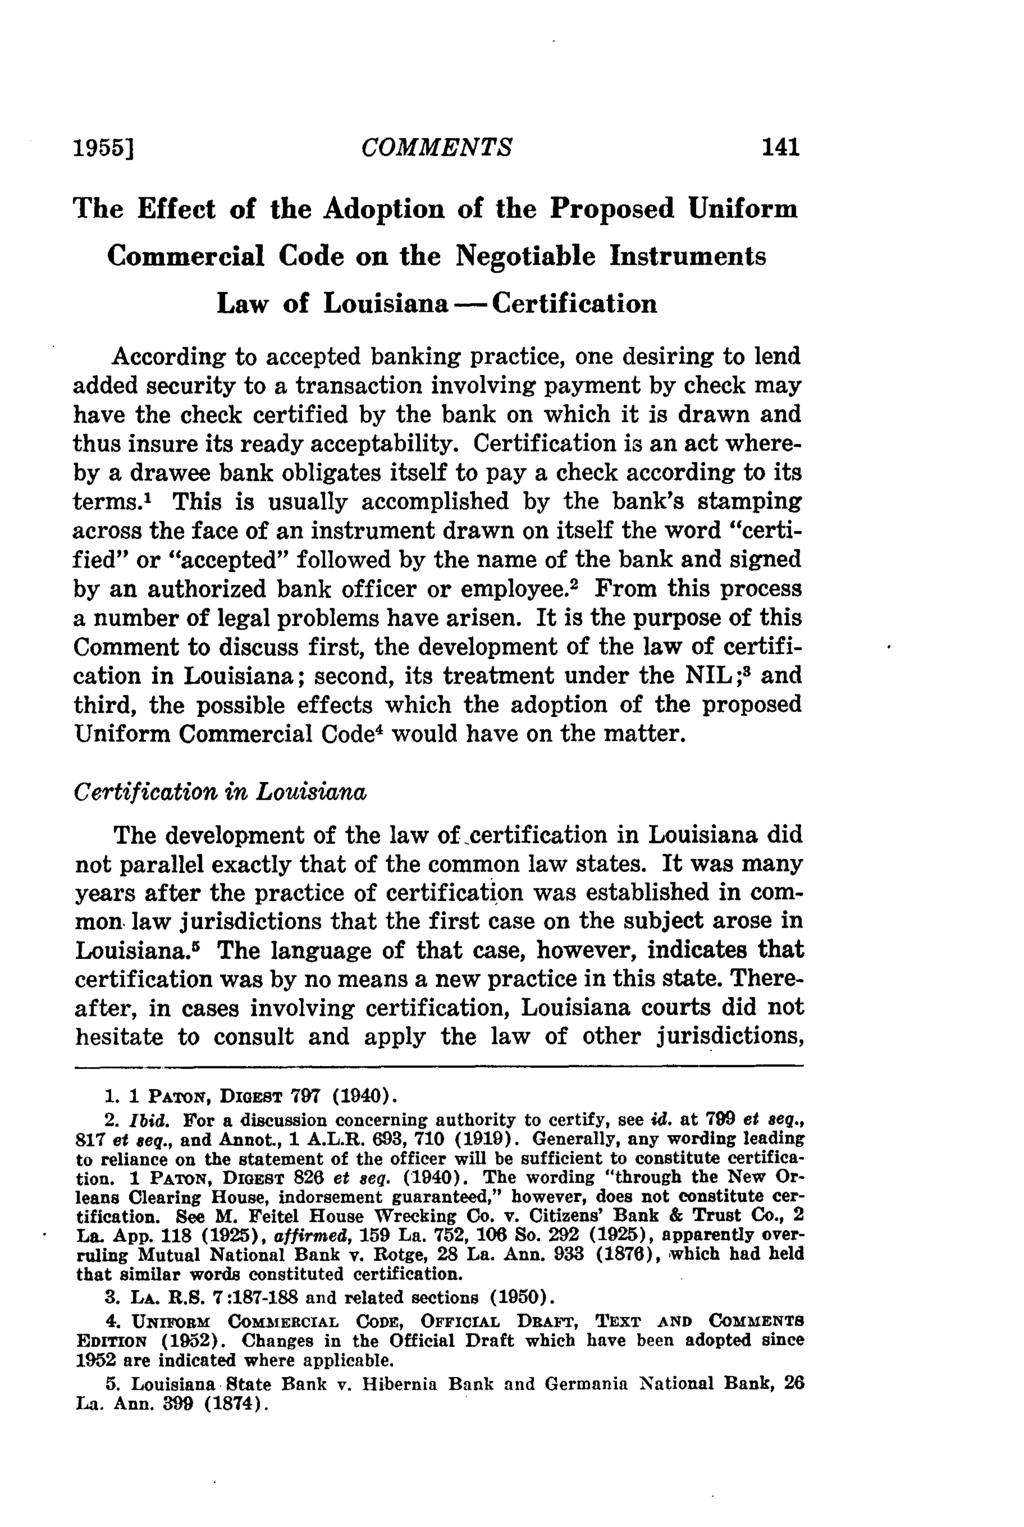 19551 COMMENTS The Effect of the Adoption of the Proposed Uniform Commercial Code on the Negotiable Instruments Law of Louisiana -Certification According to accepted banking practice, one desiring to